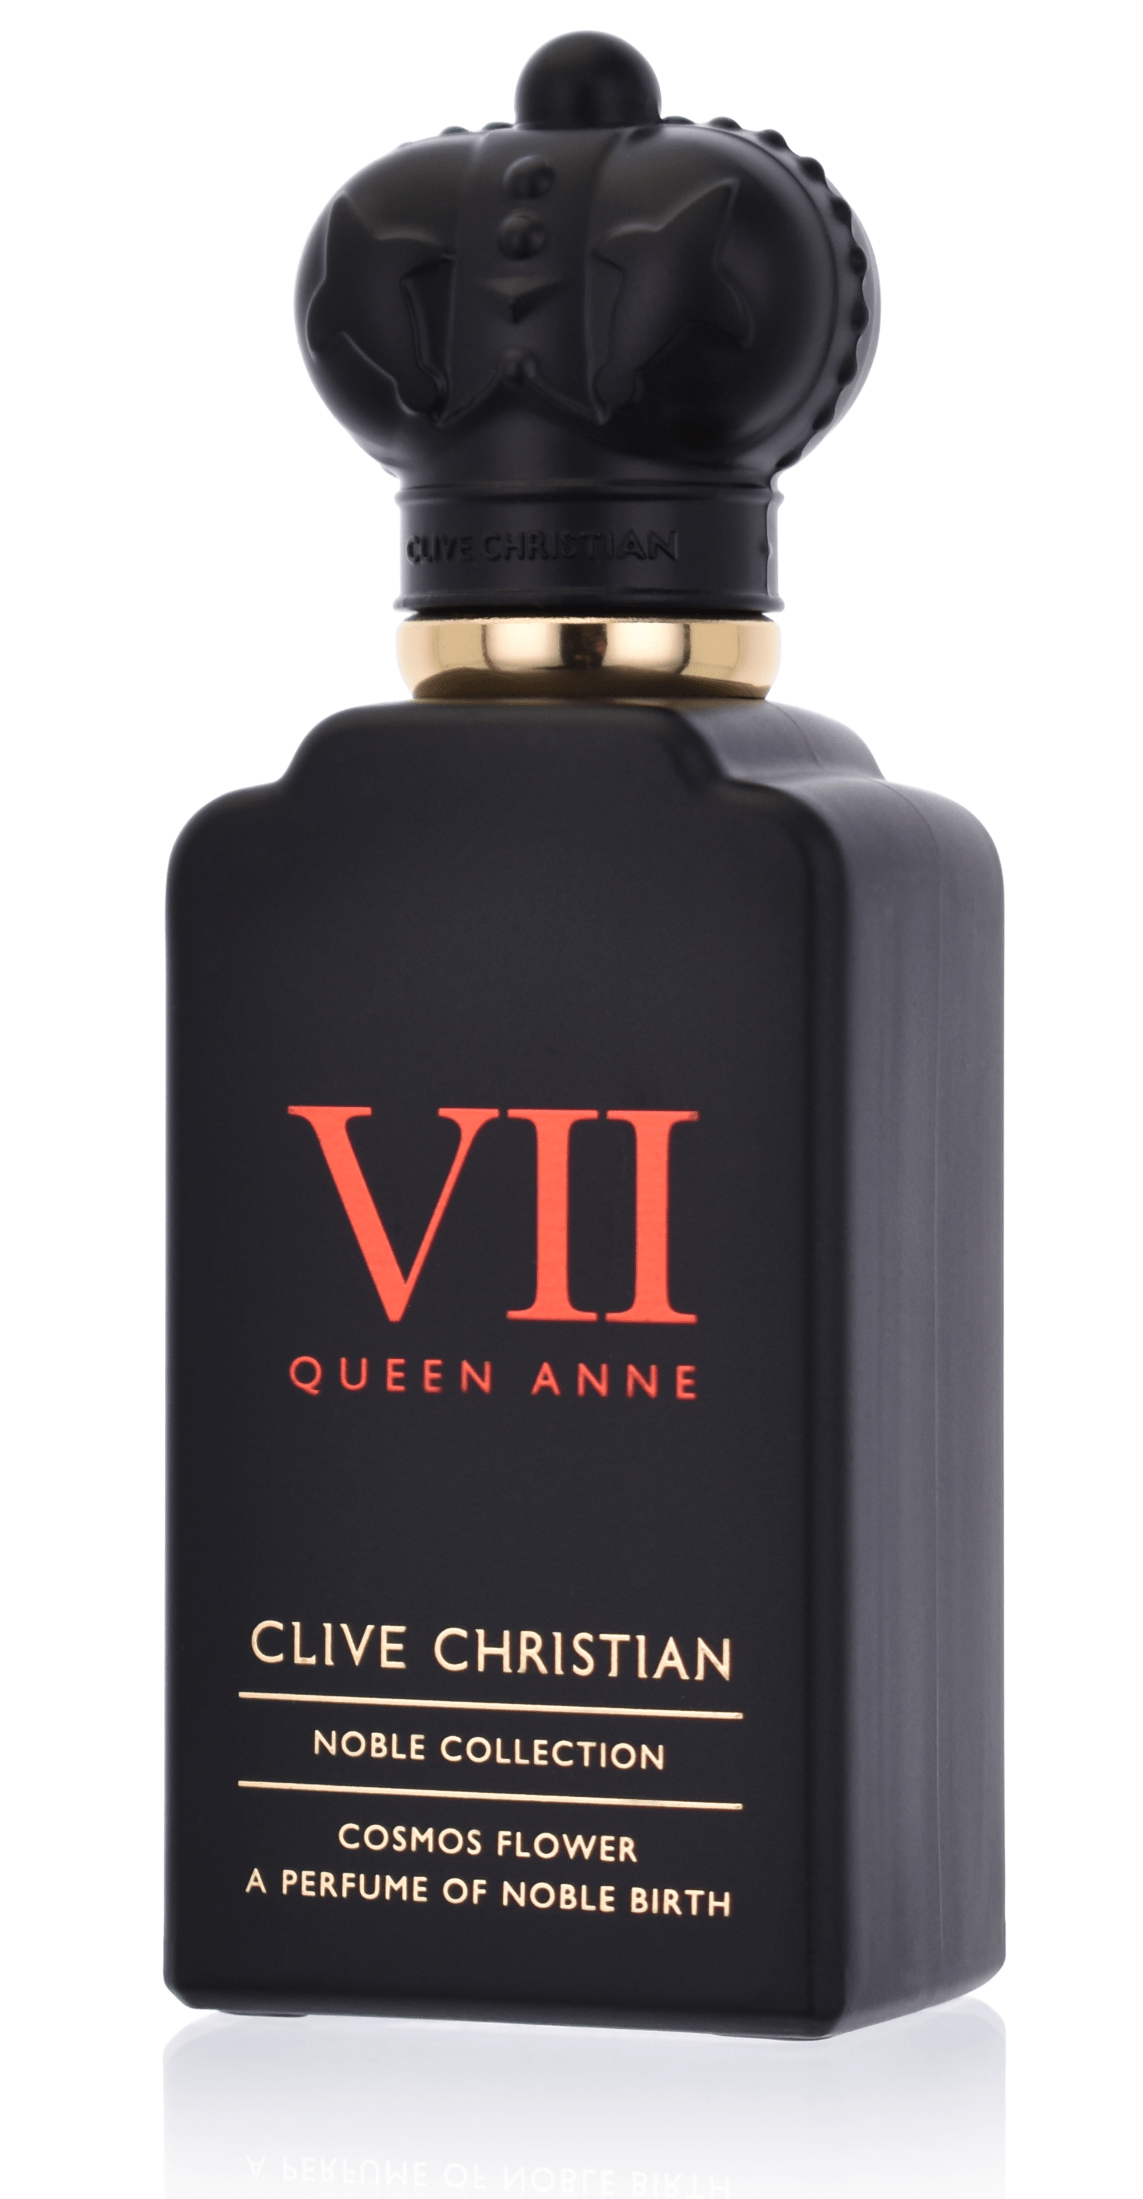 Clive Christian Noble Collection VII Queen Anne Cosmos Flower 50 ml Parfum 